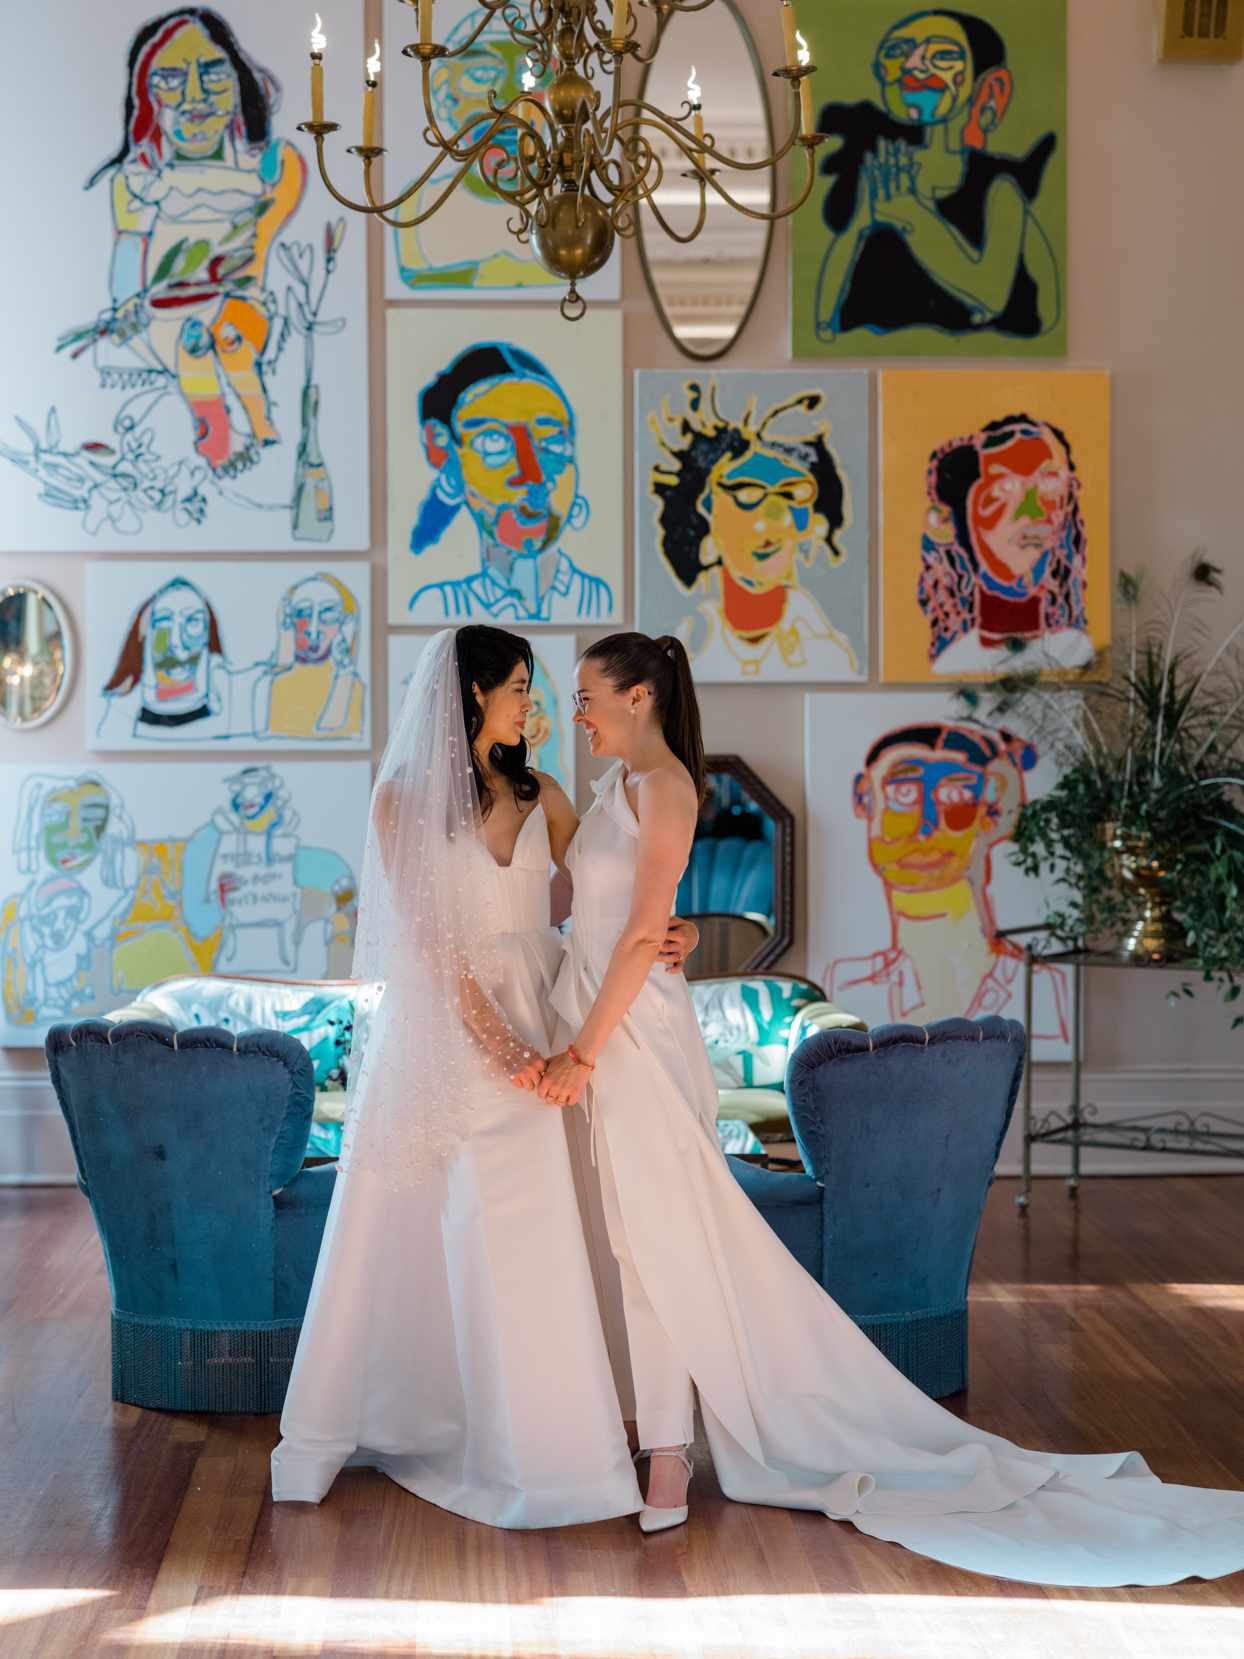 brides in wedding venue with colorful wall art paintings